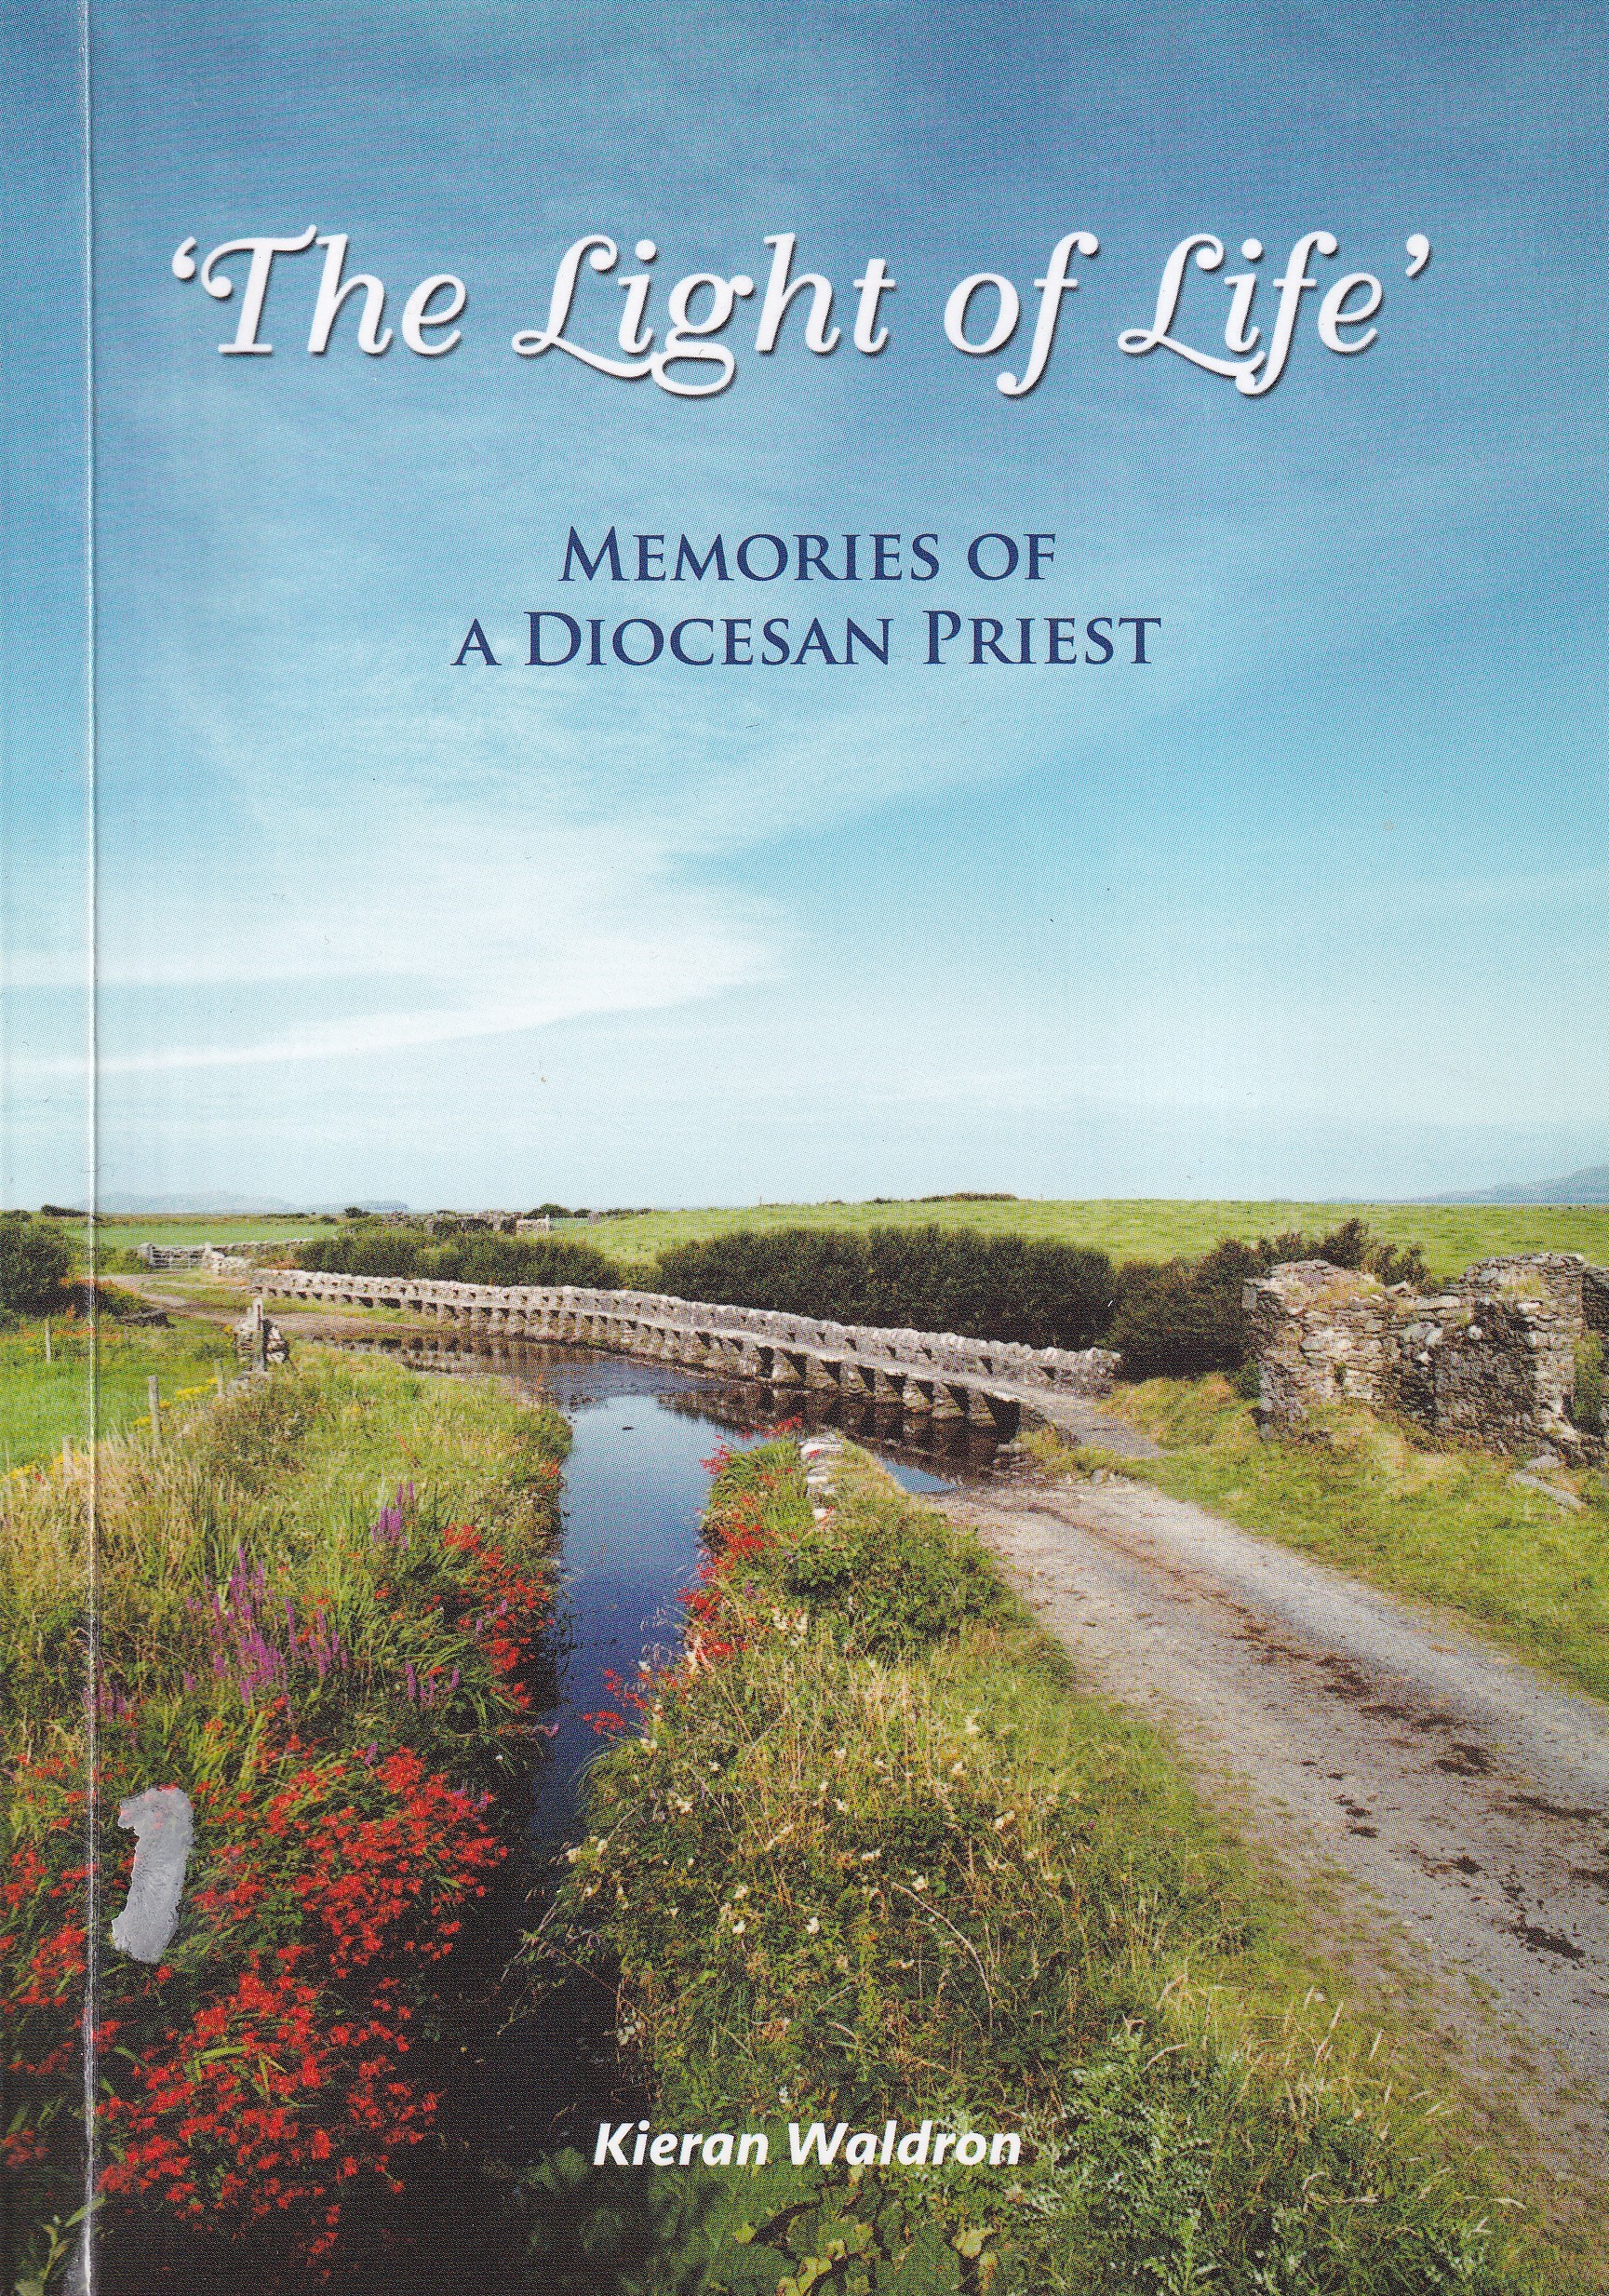 The Light of Life: Memories of a Diocesan Priest by Kieran Waldron